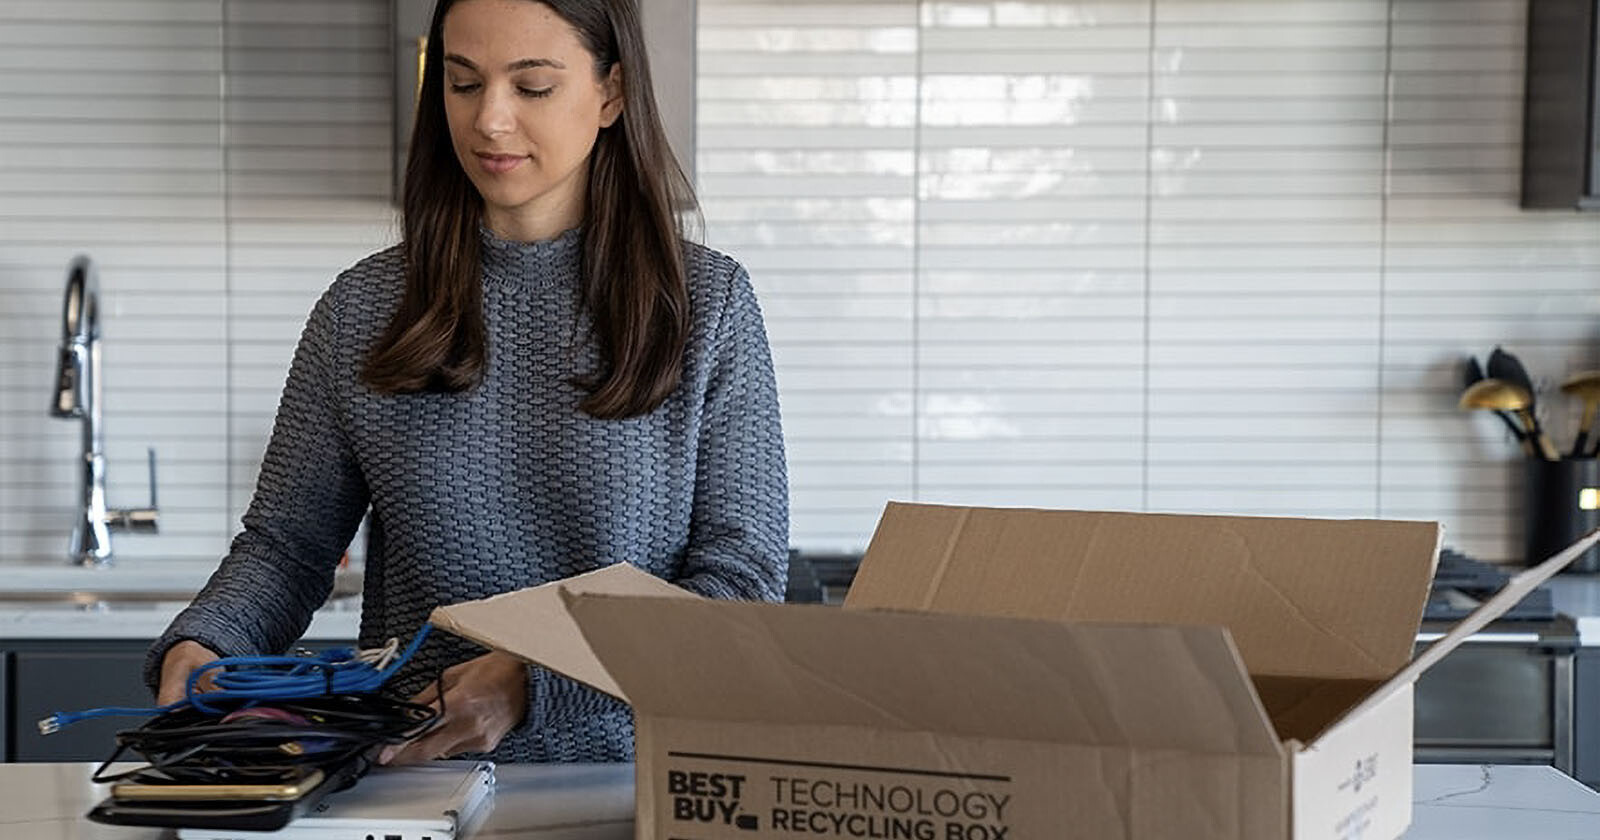  best buy launches mail-in electronics recycling service 